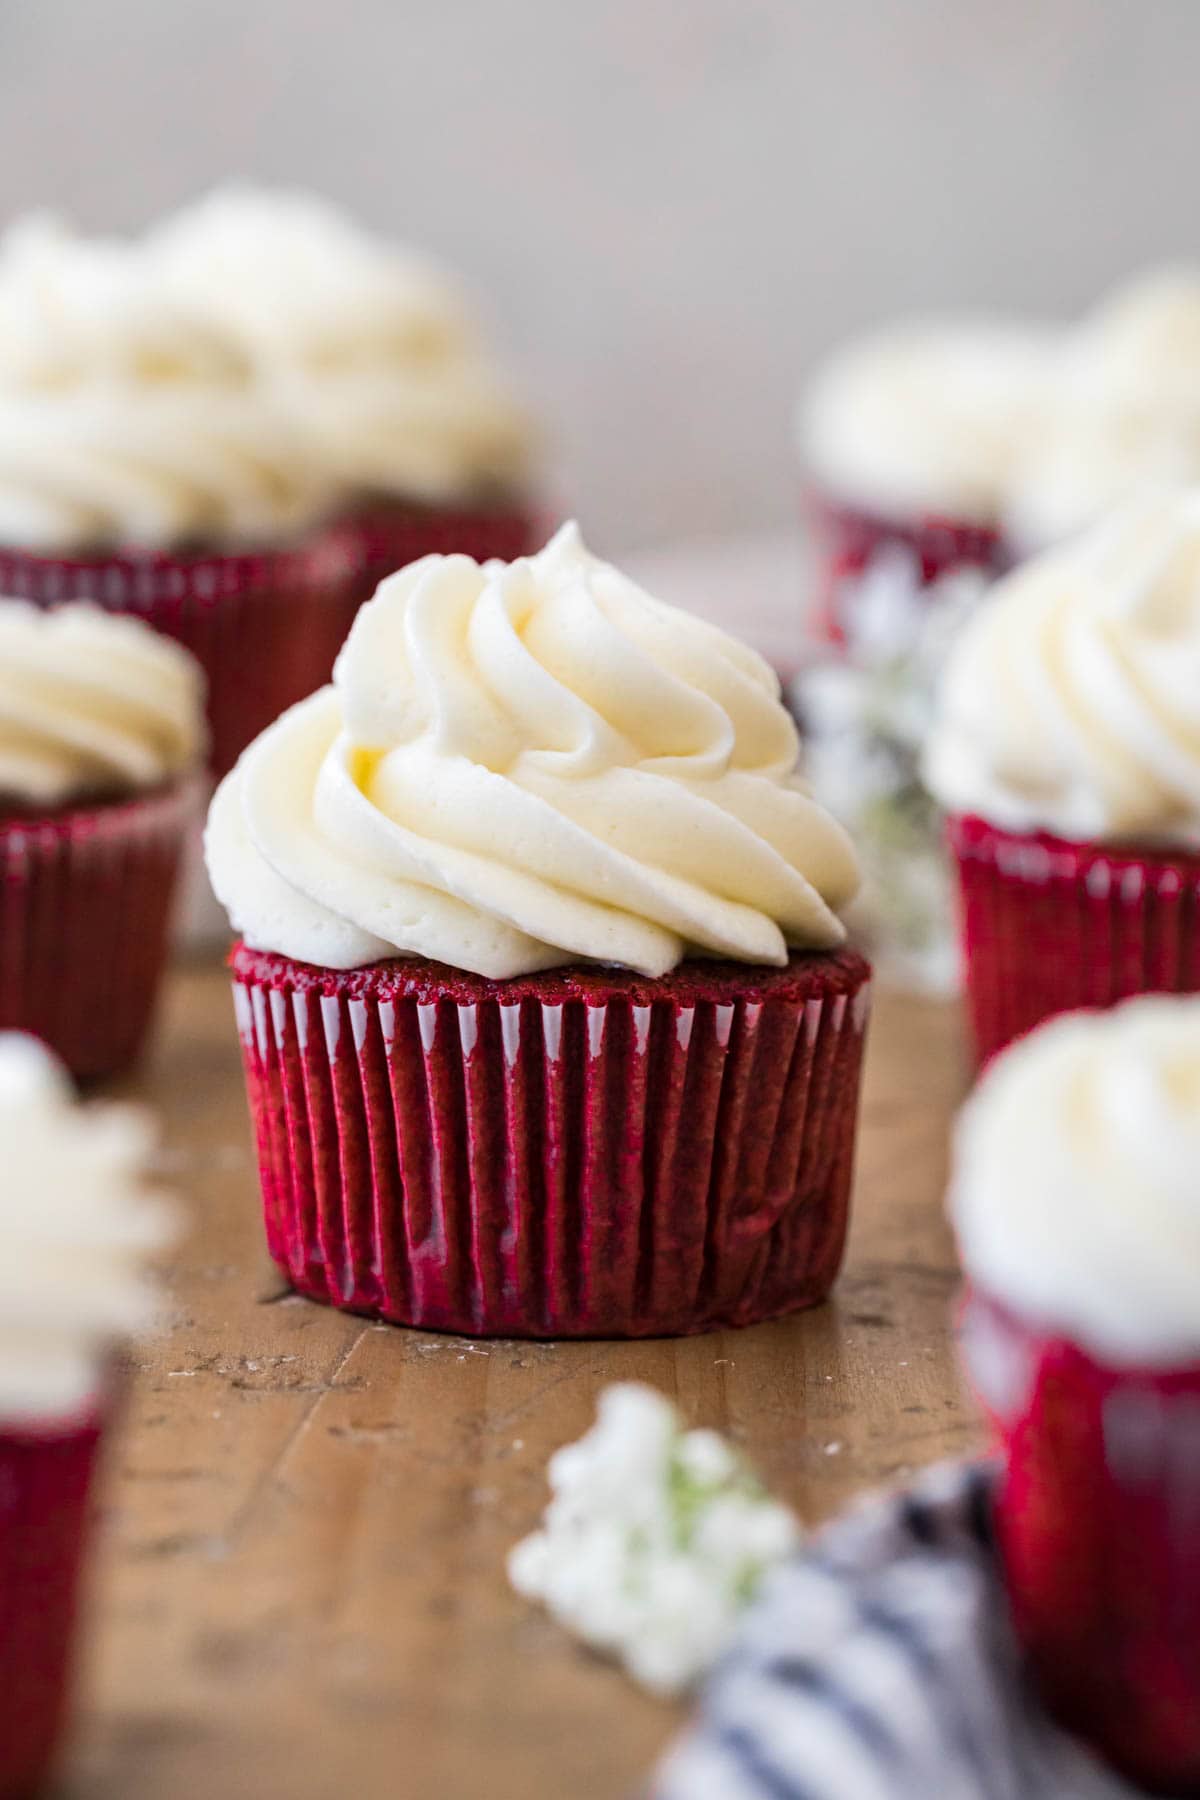 Red cupcakes topped with large piped swirls of ermine frosting.